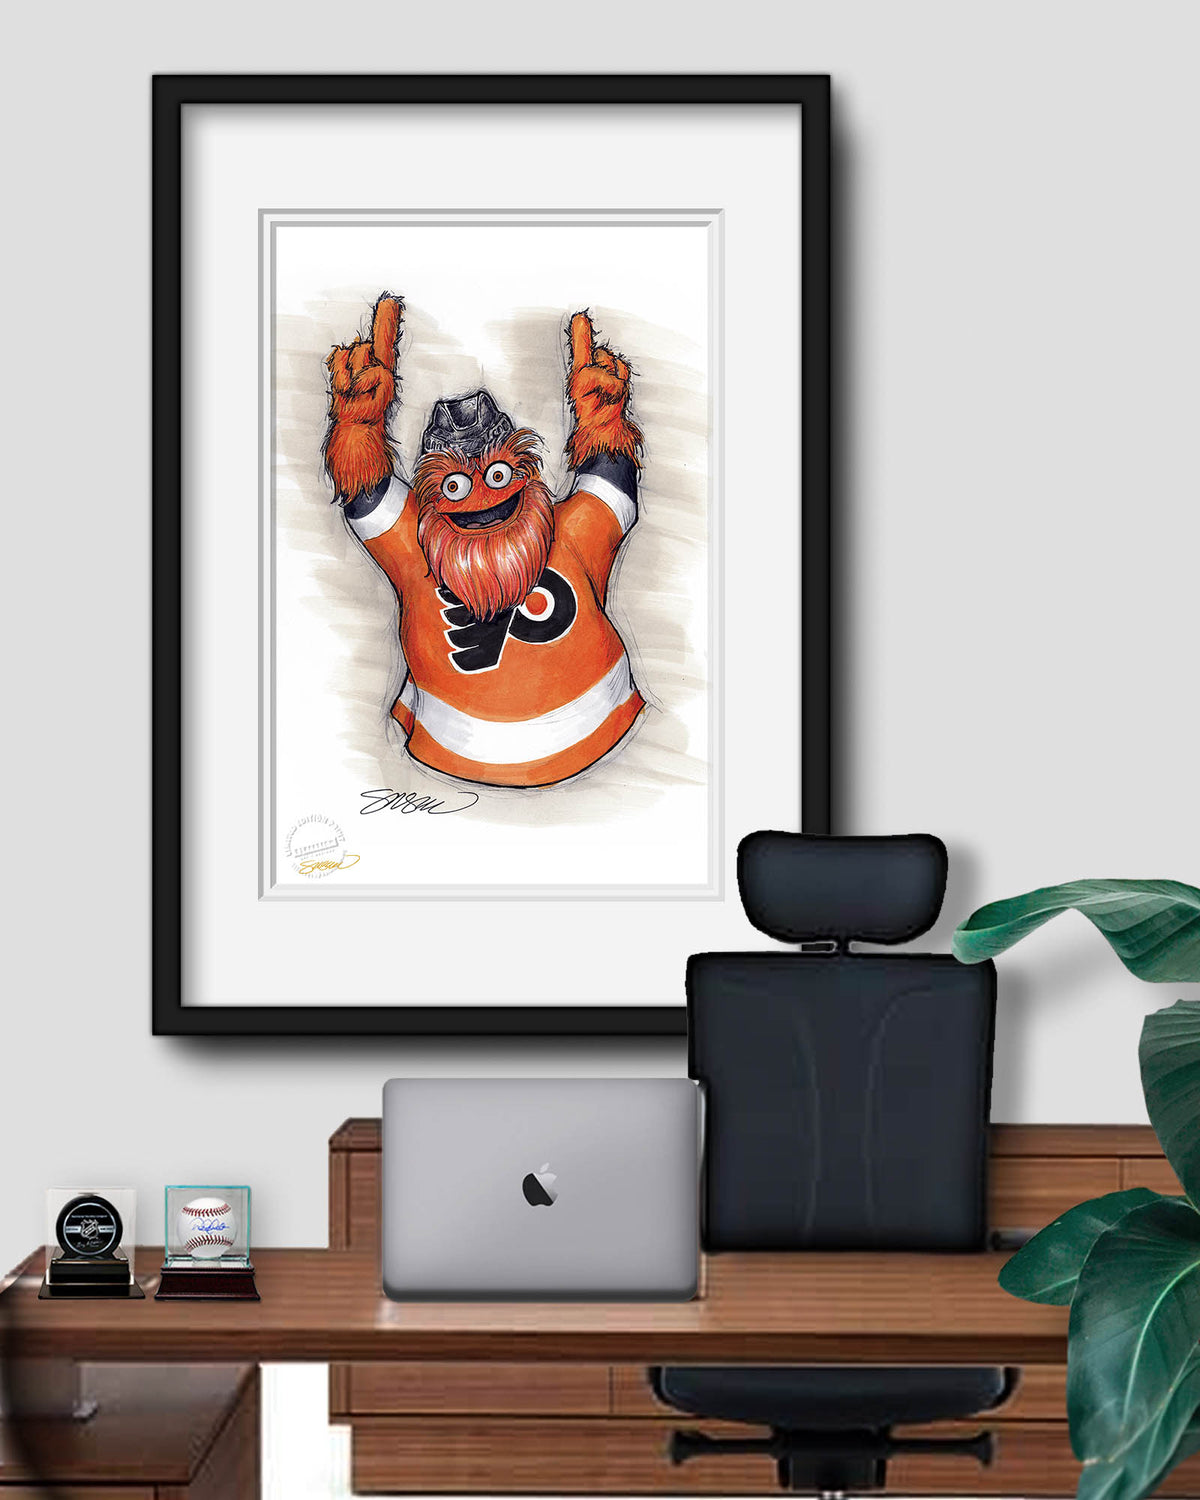 Gritty's Origin Story: How the Philadelphia Flyers Mascot Was